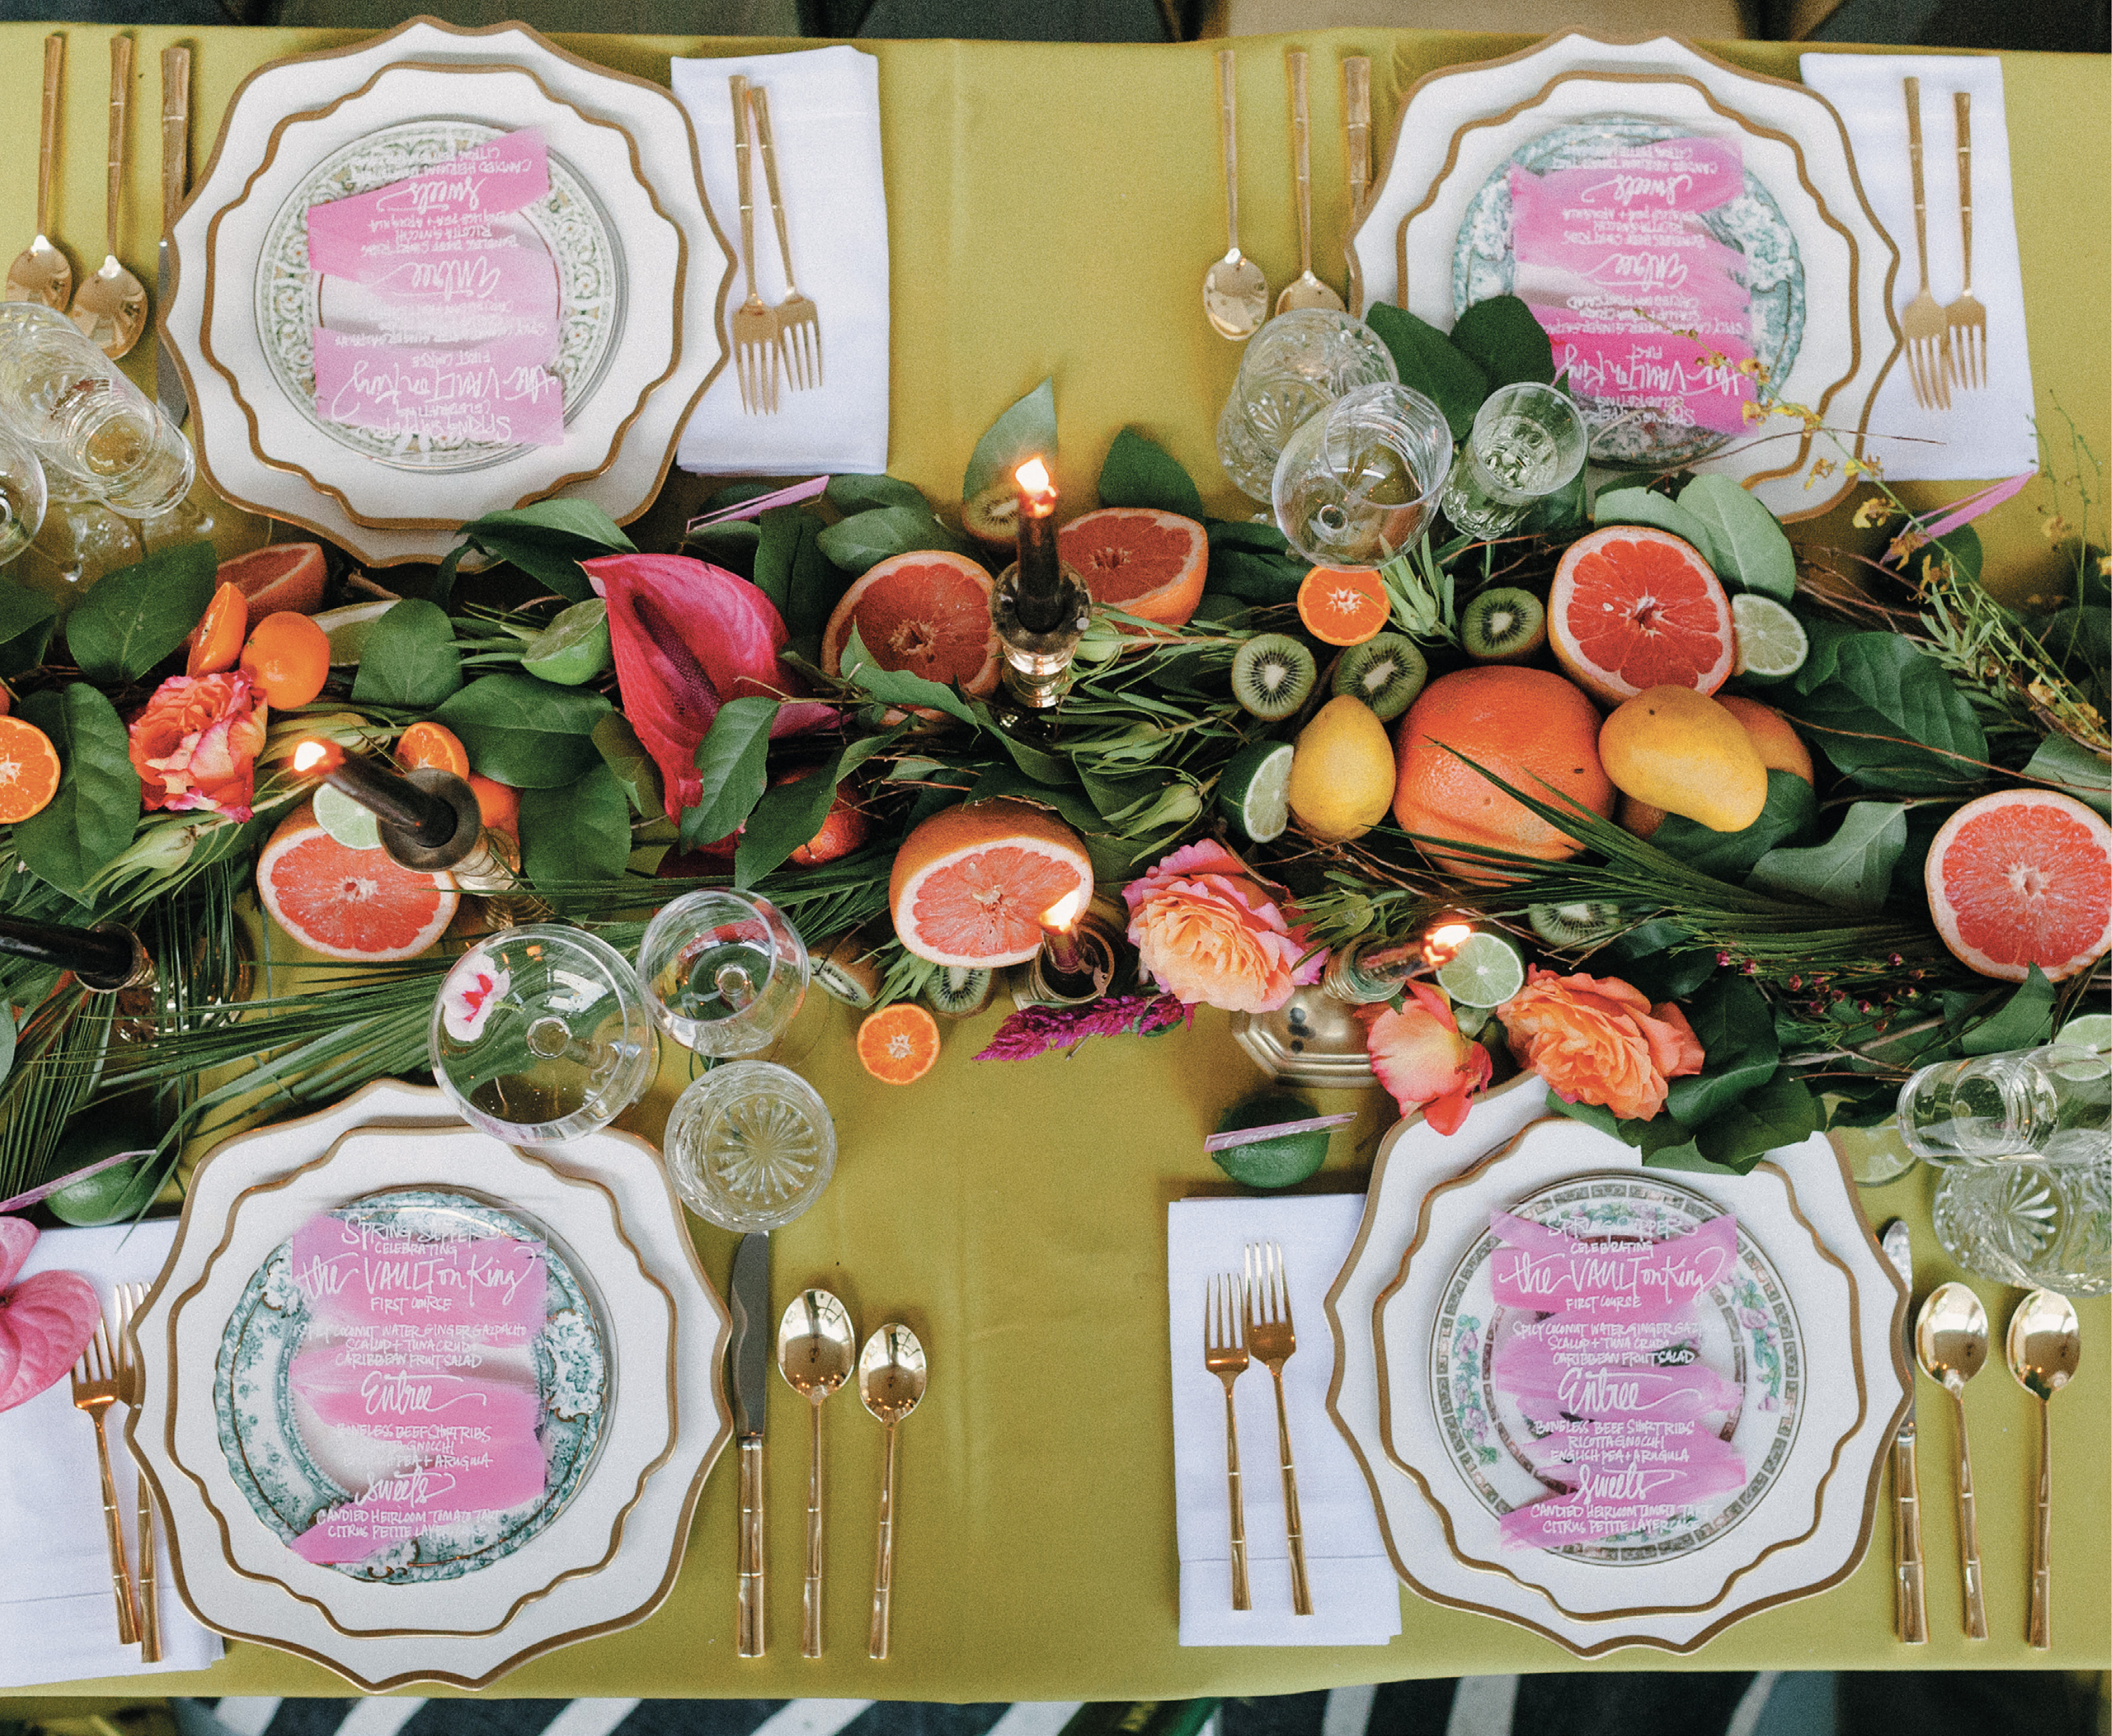 Citrus and tropical edibles appeared everywhere, from the luscious table runner...